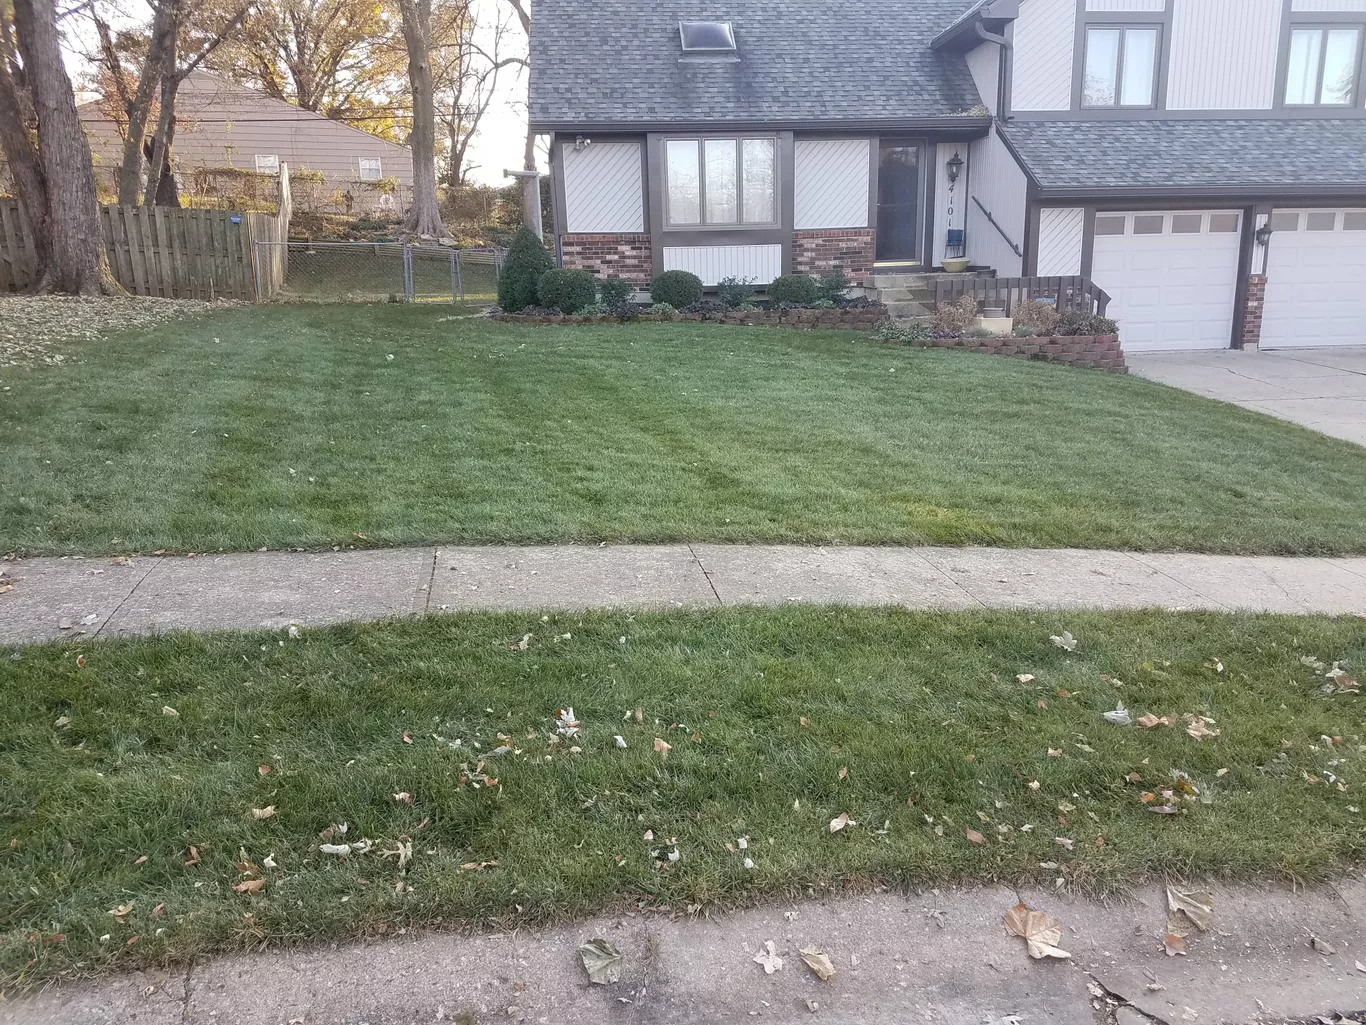 A house with newly mowed lawn and clear of leaves